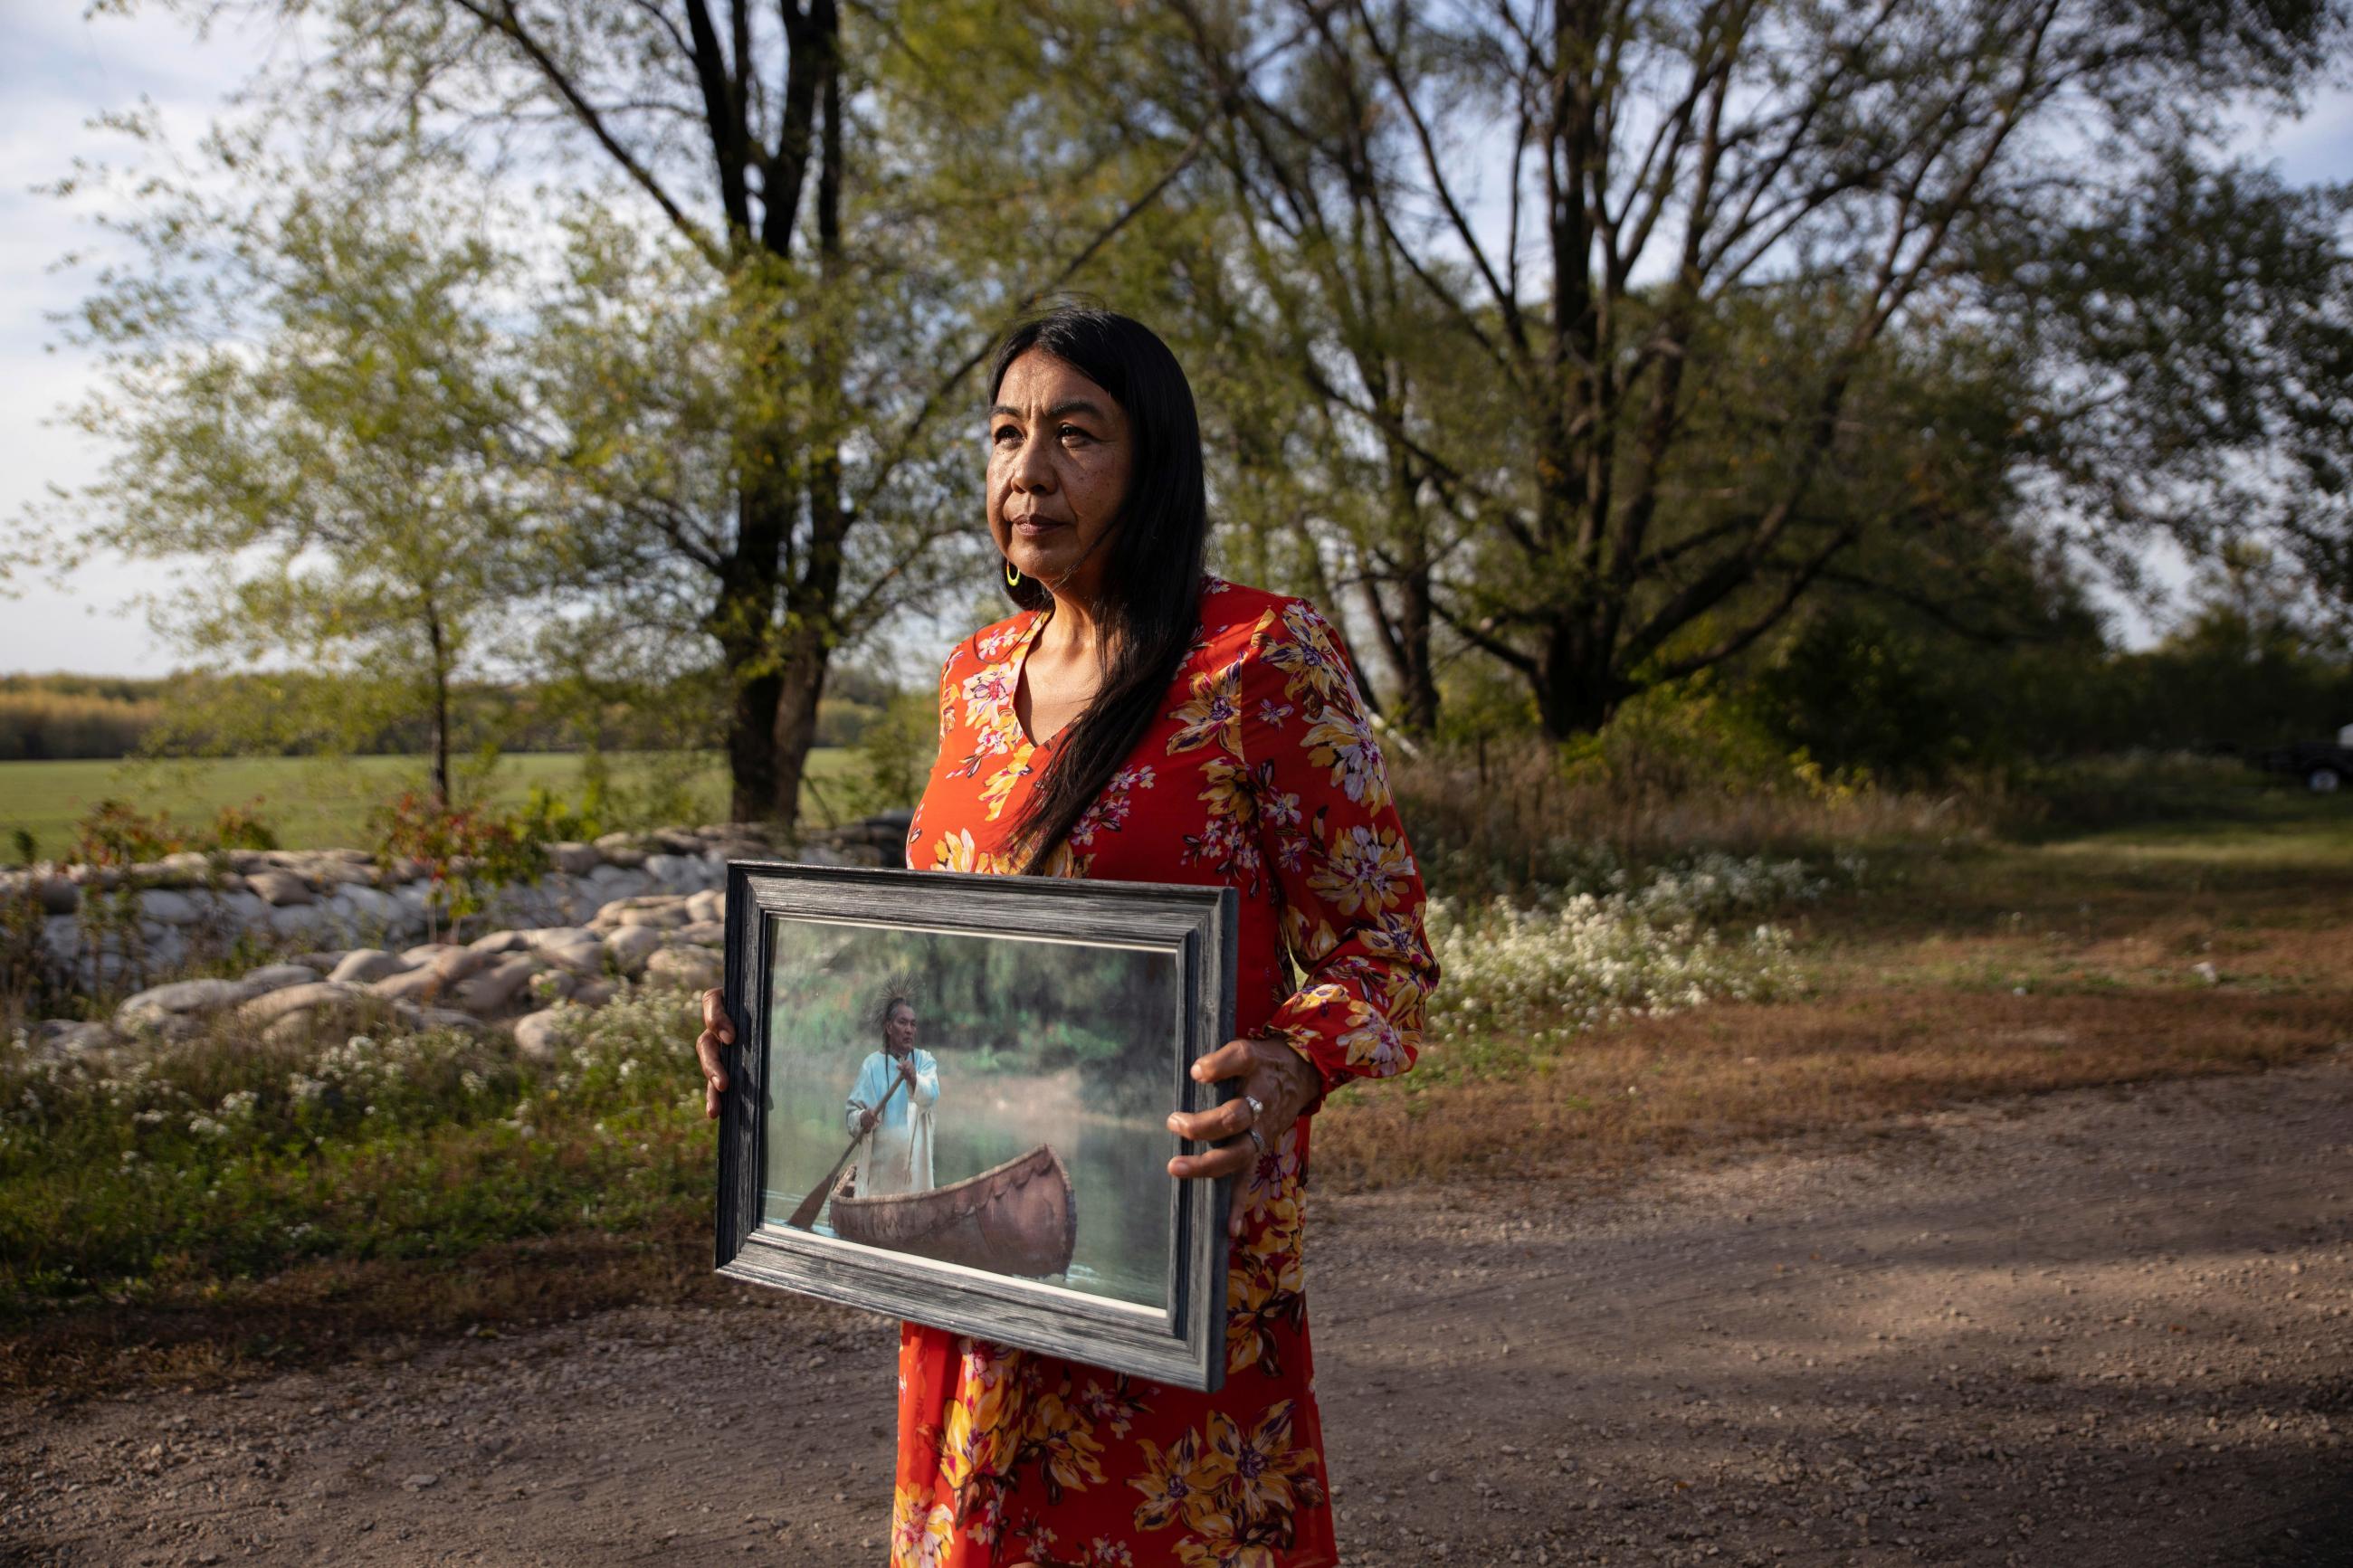 A woman holds a portrait of her late husband after he passed away due to a diabetes-related heart attack, in Red Wing, Minnesota, on September 29, 2021.